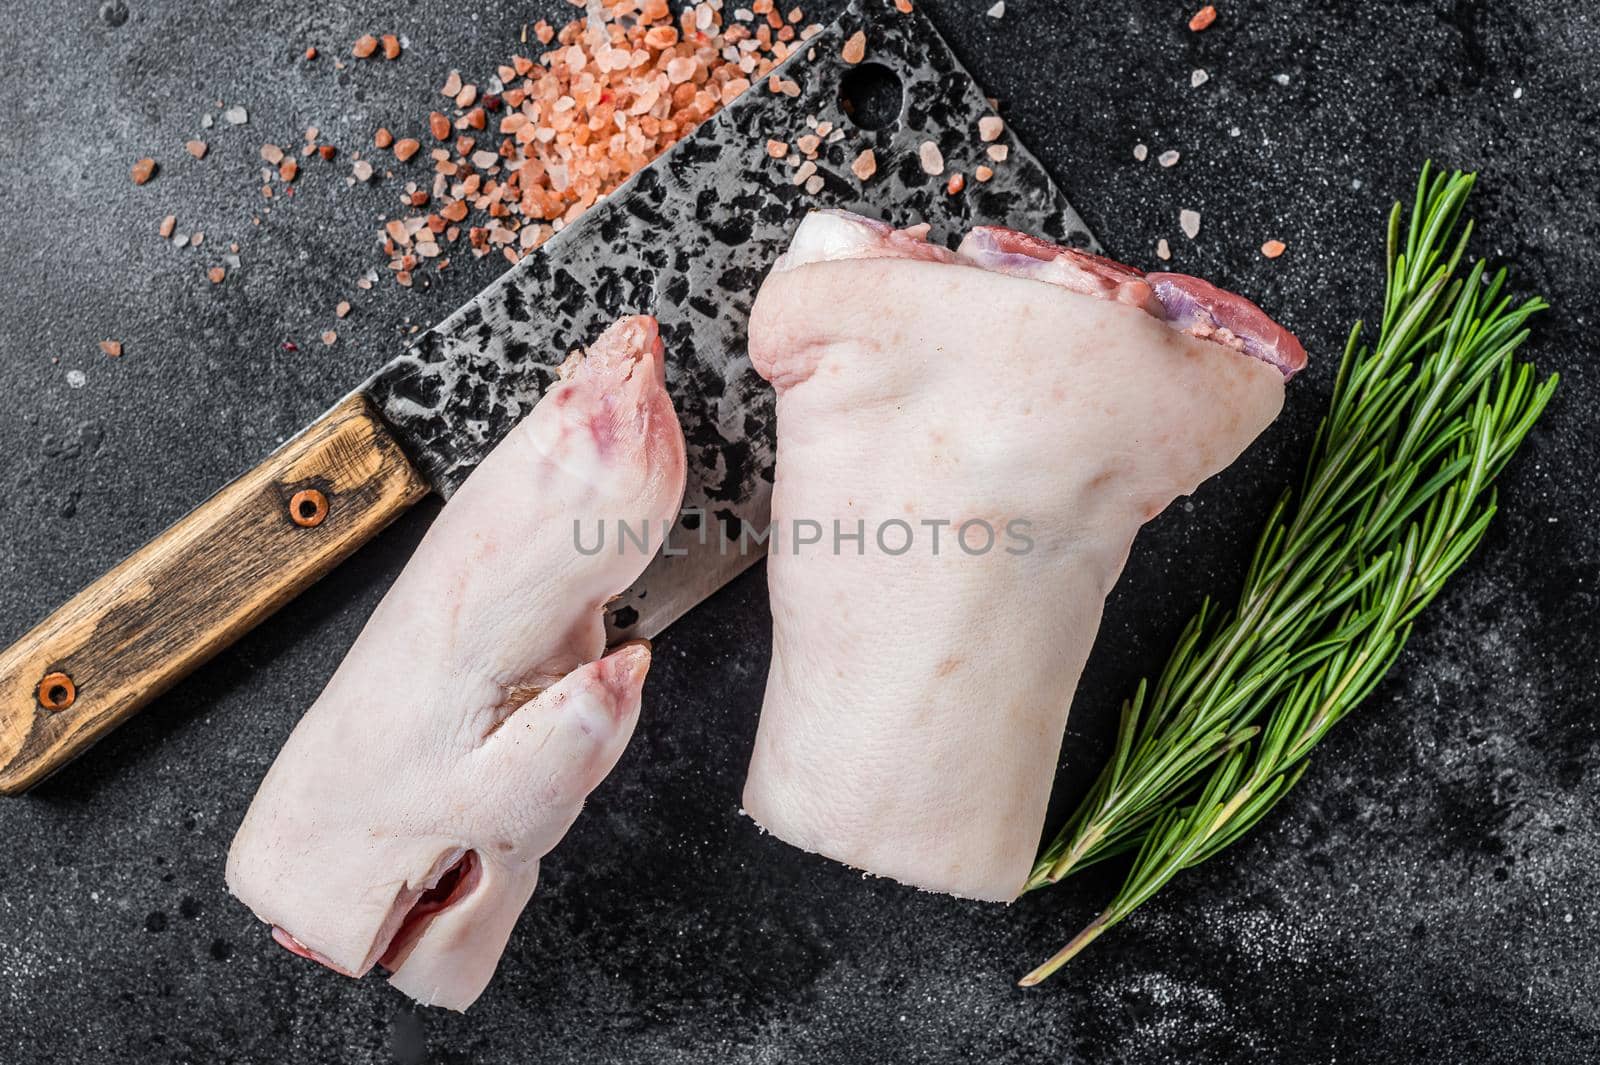 Butcher shop - Raw pork hoof, knuckle, feet on a cutting board. Black background. Top view by Composter